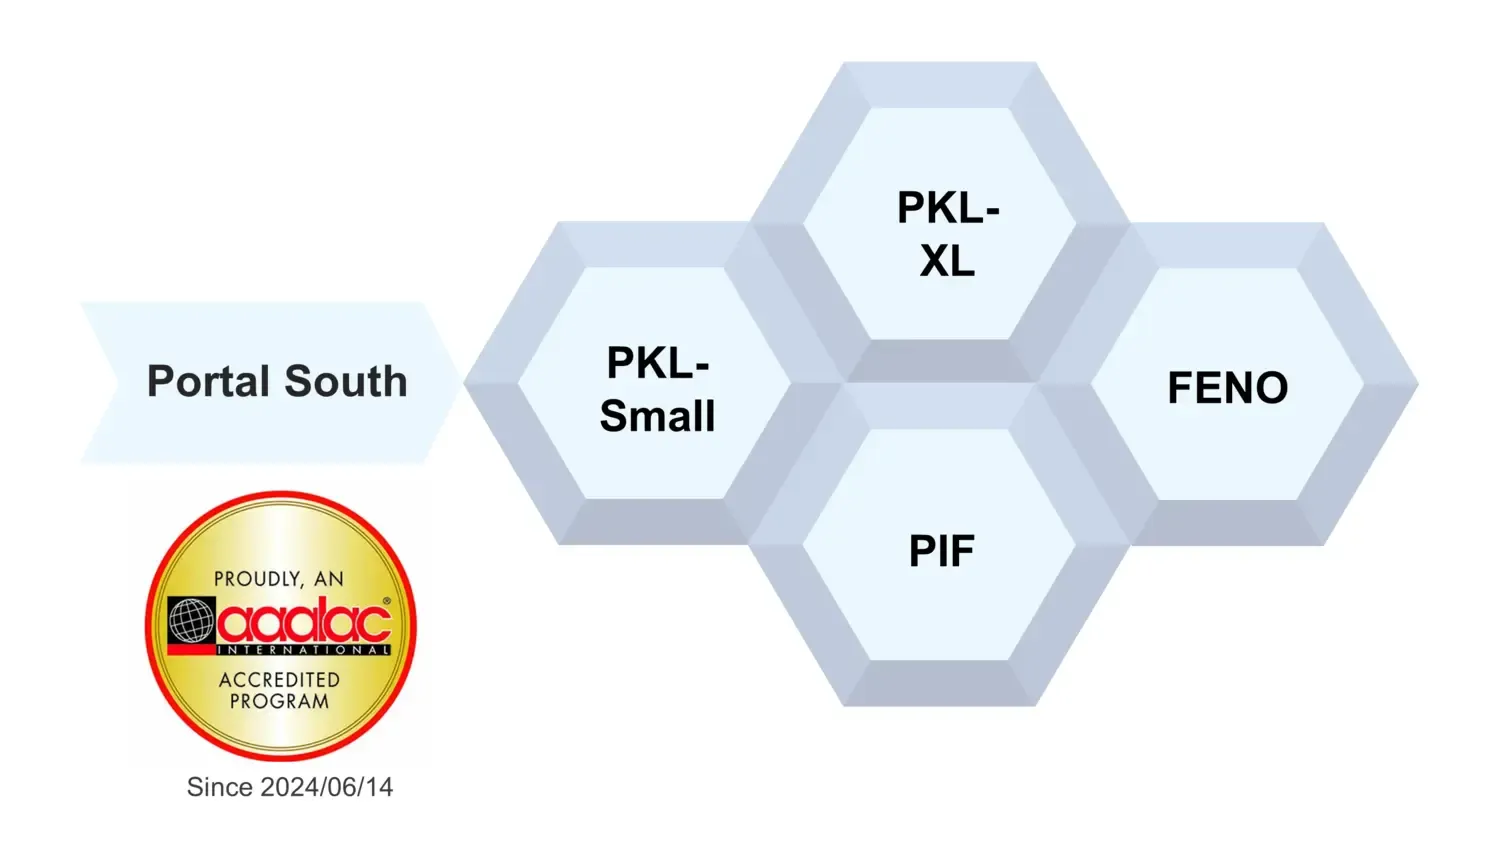 Organization of how PIF, FENO, Portal South and all connected to the animal facility PKL.